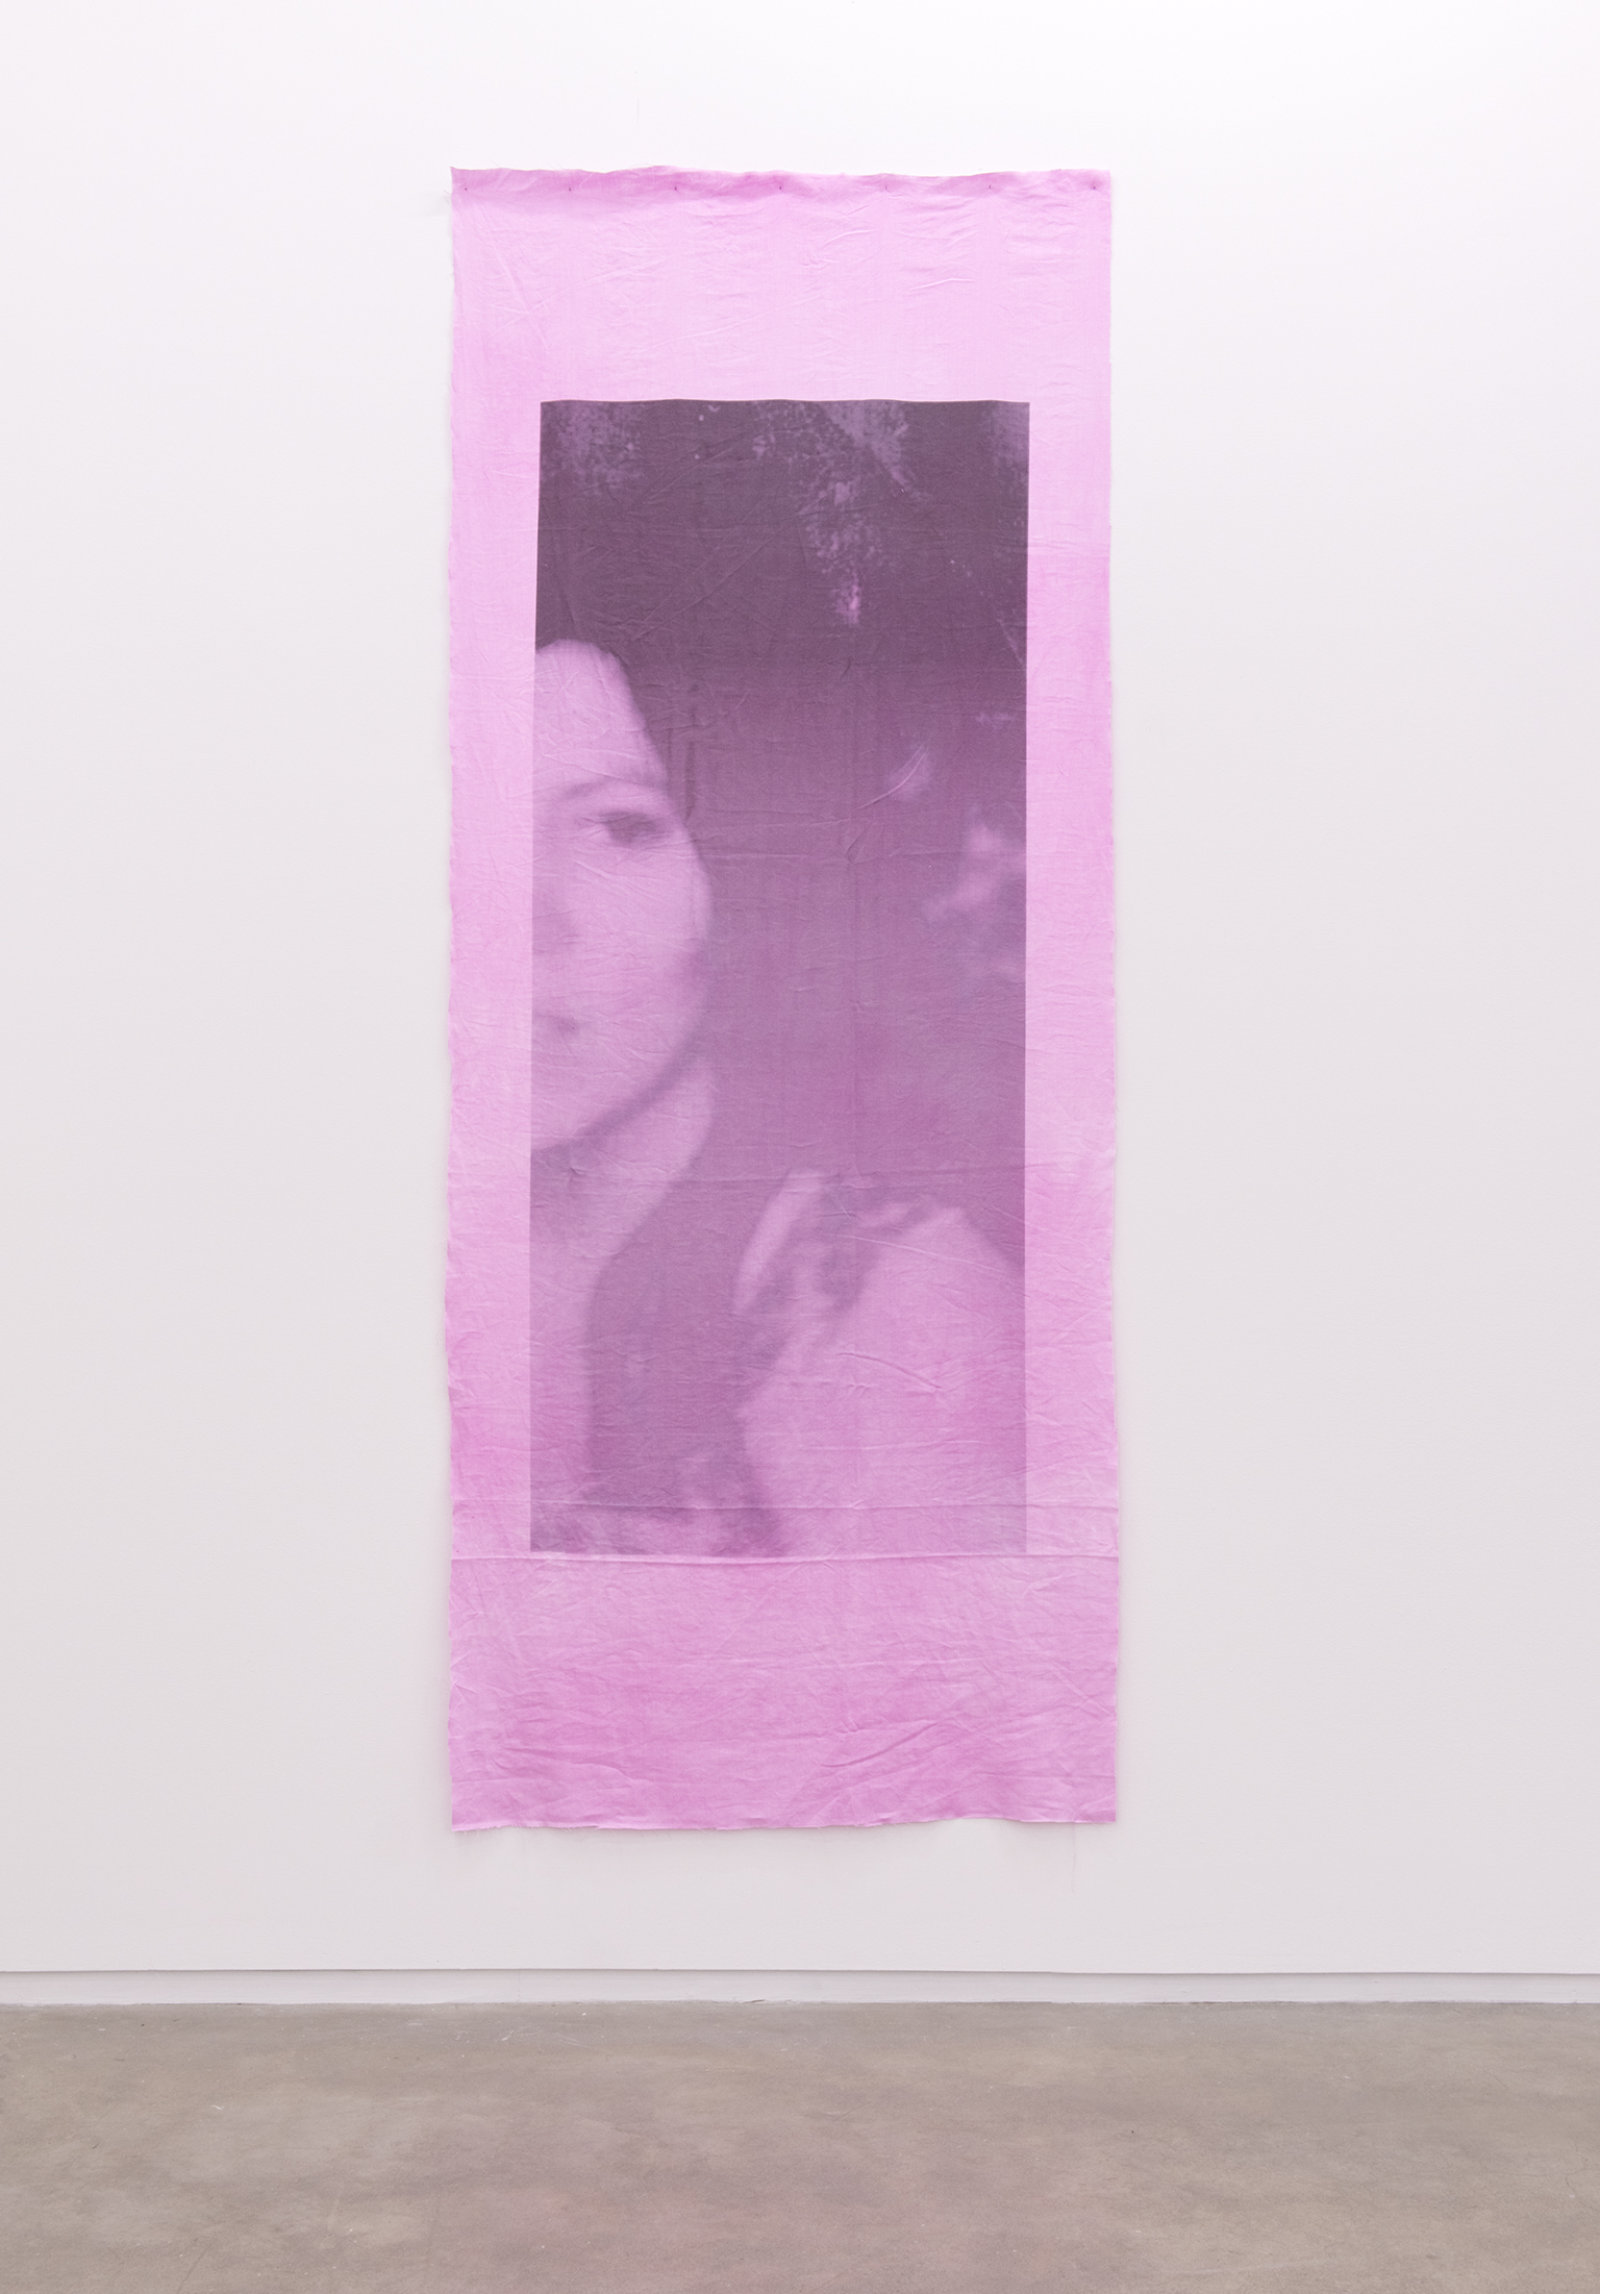 Duane Linklater, Family photograph (detail), 2014, 2 inkjet prints on hand dyed linen, nails, 110 x 44 in. (278 x 110 cm), left: 101 x 43 inches (255 x 109 cm), right: 110 x 44 (278 x 112 cm)